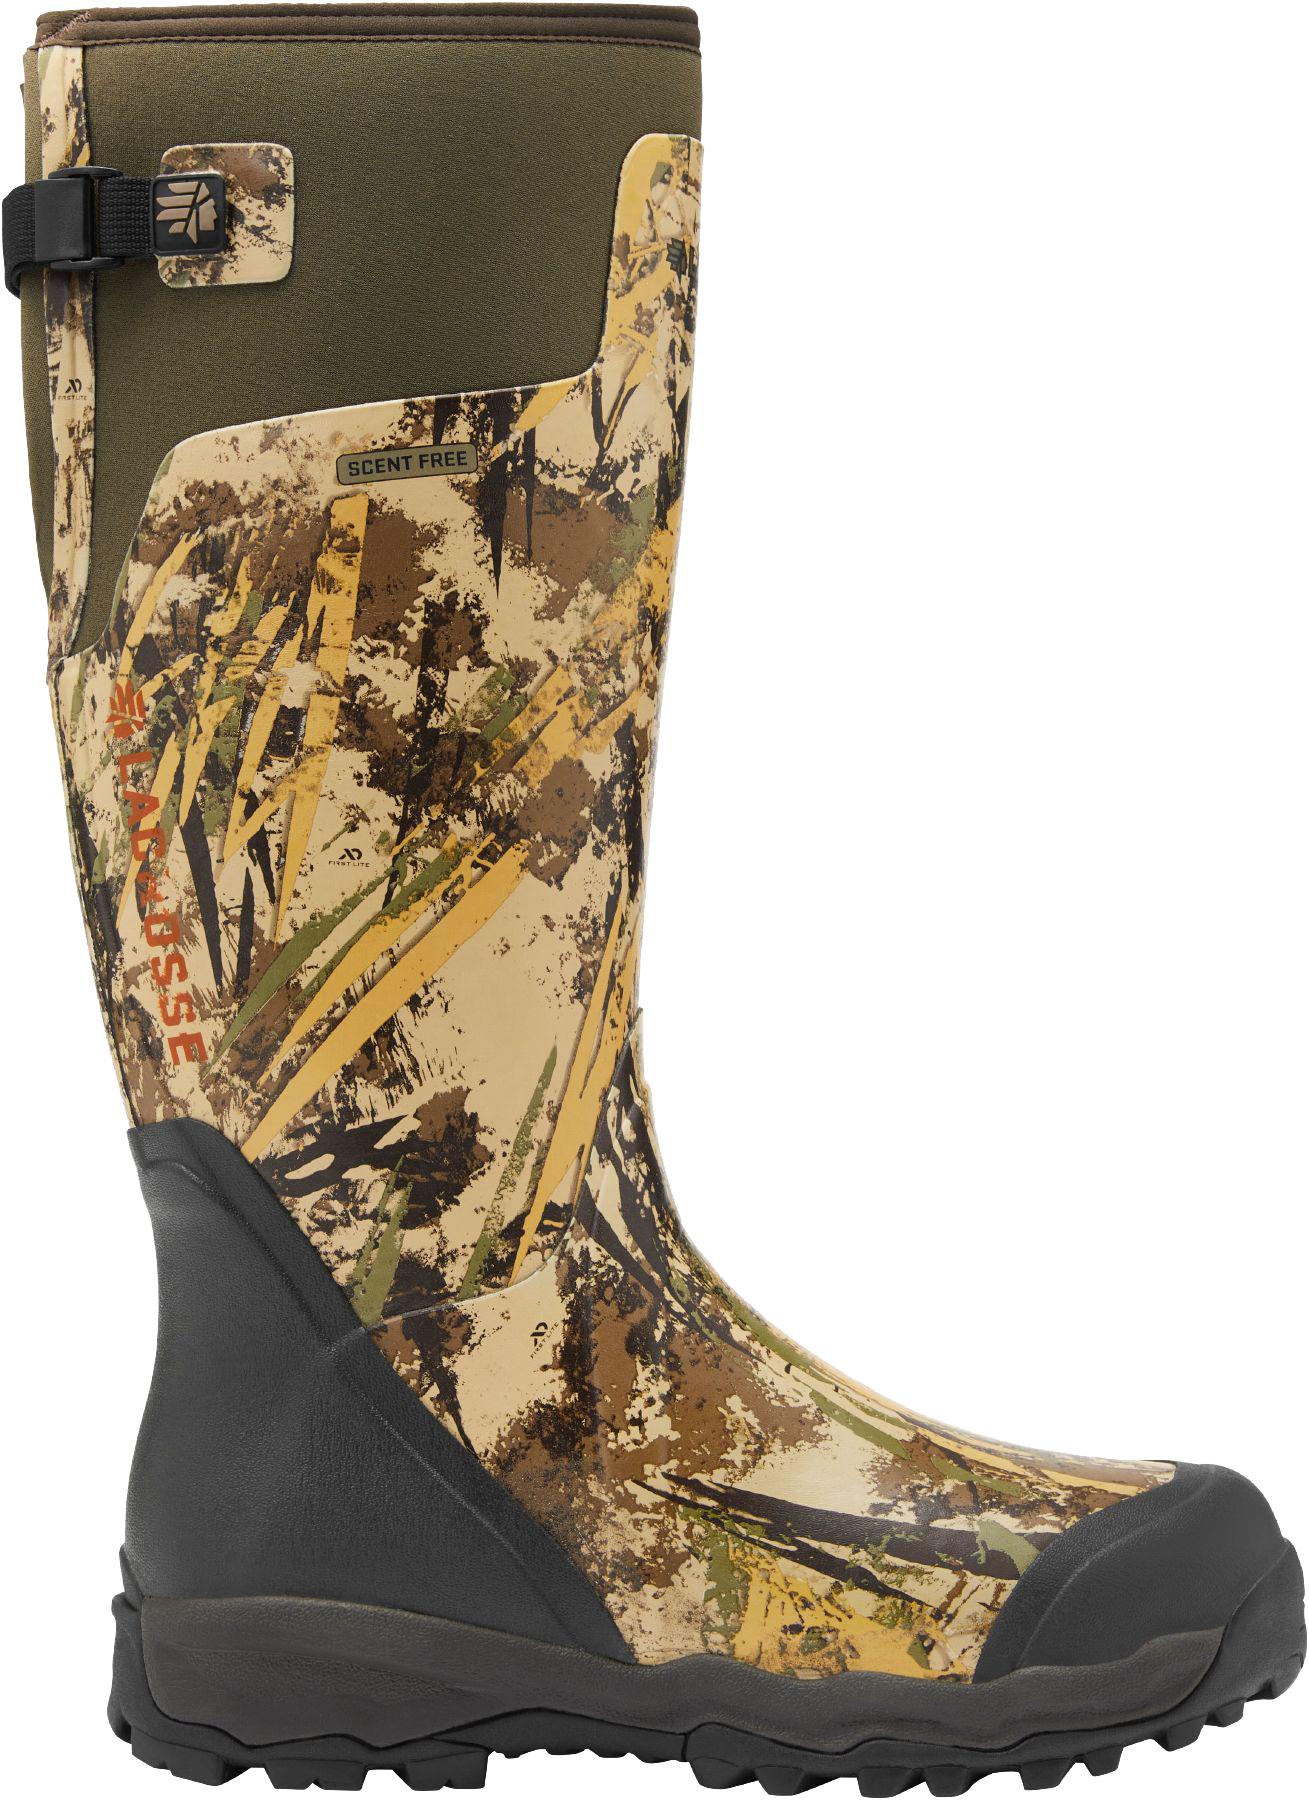 LaCrosse AlphaBurly Pro Hunting Boots for Men - First Lite Typha - 9M